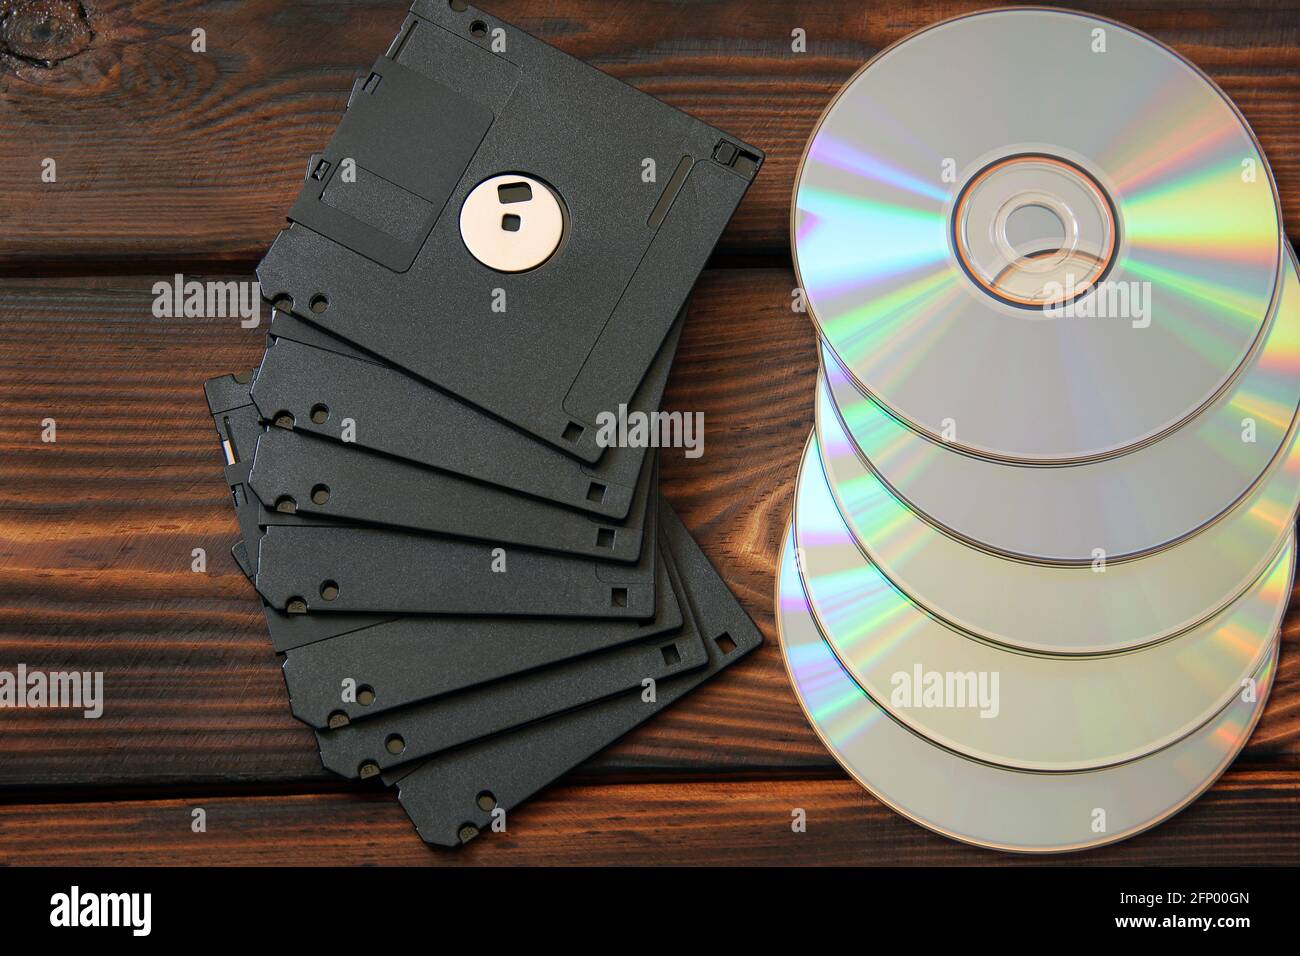 Floppy disks and disks on wooden background Stock Photo